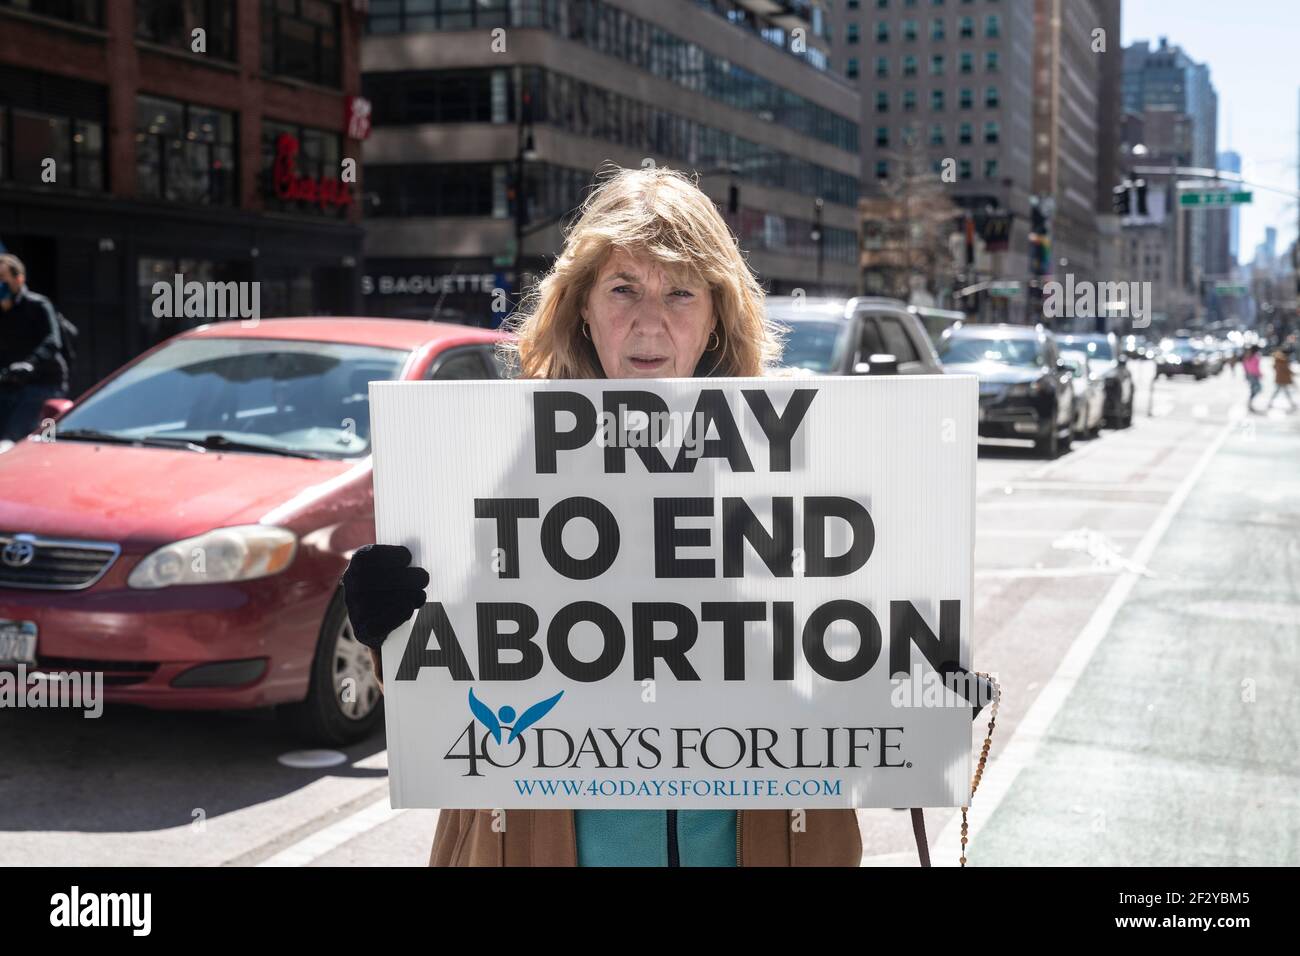 New York, NY - March 13, 2021: Clergy and members of Roman Catholic Church The Holy Innocents march and pray to end abortion on Midtown streets Stock Photo